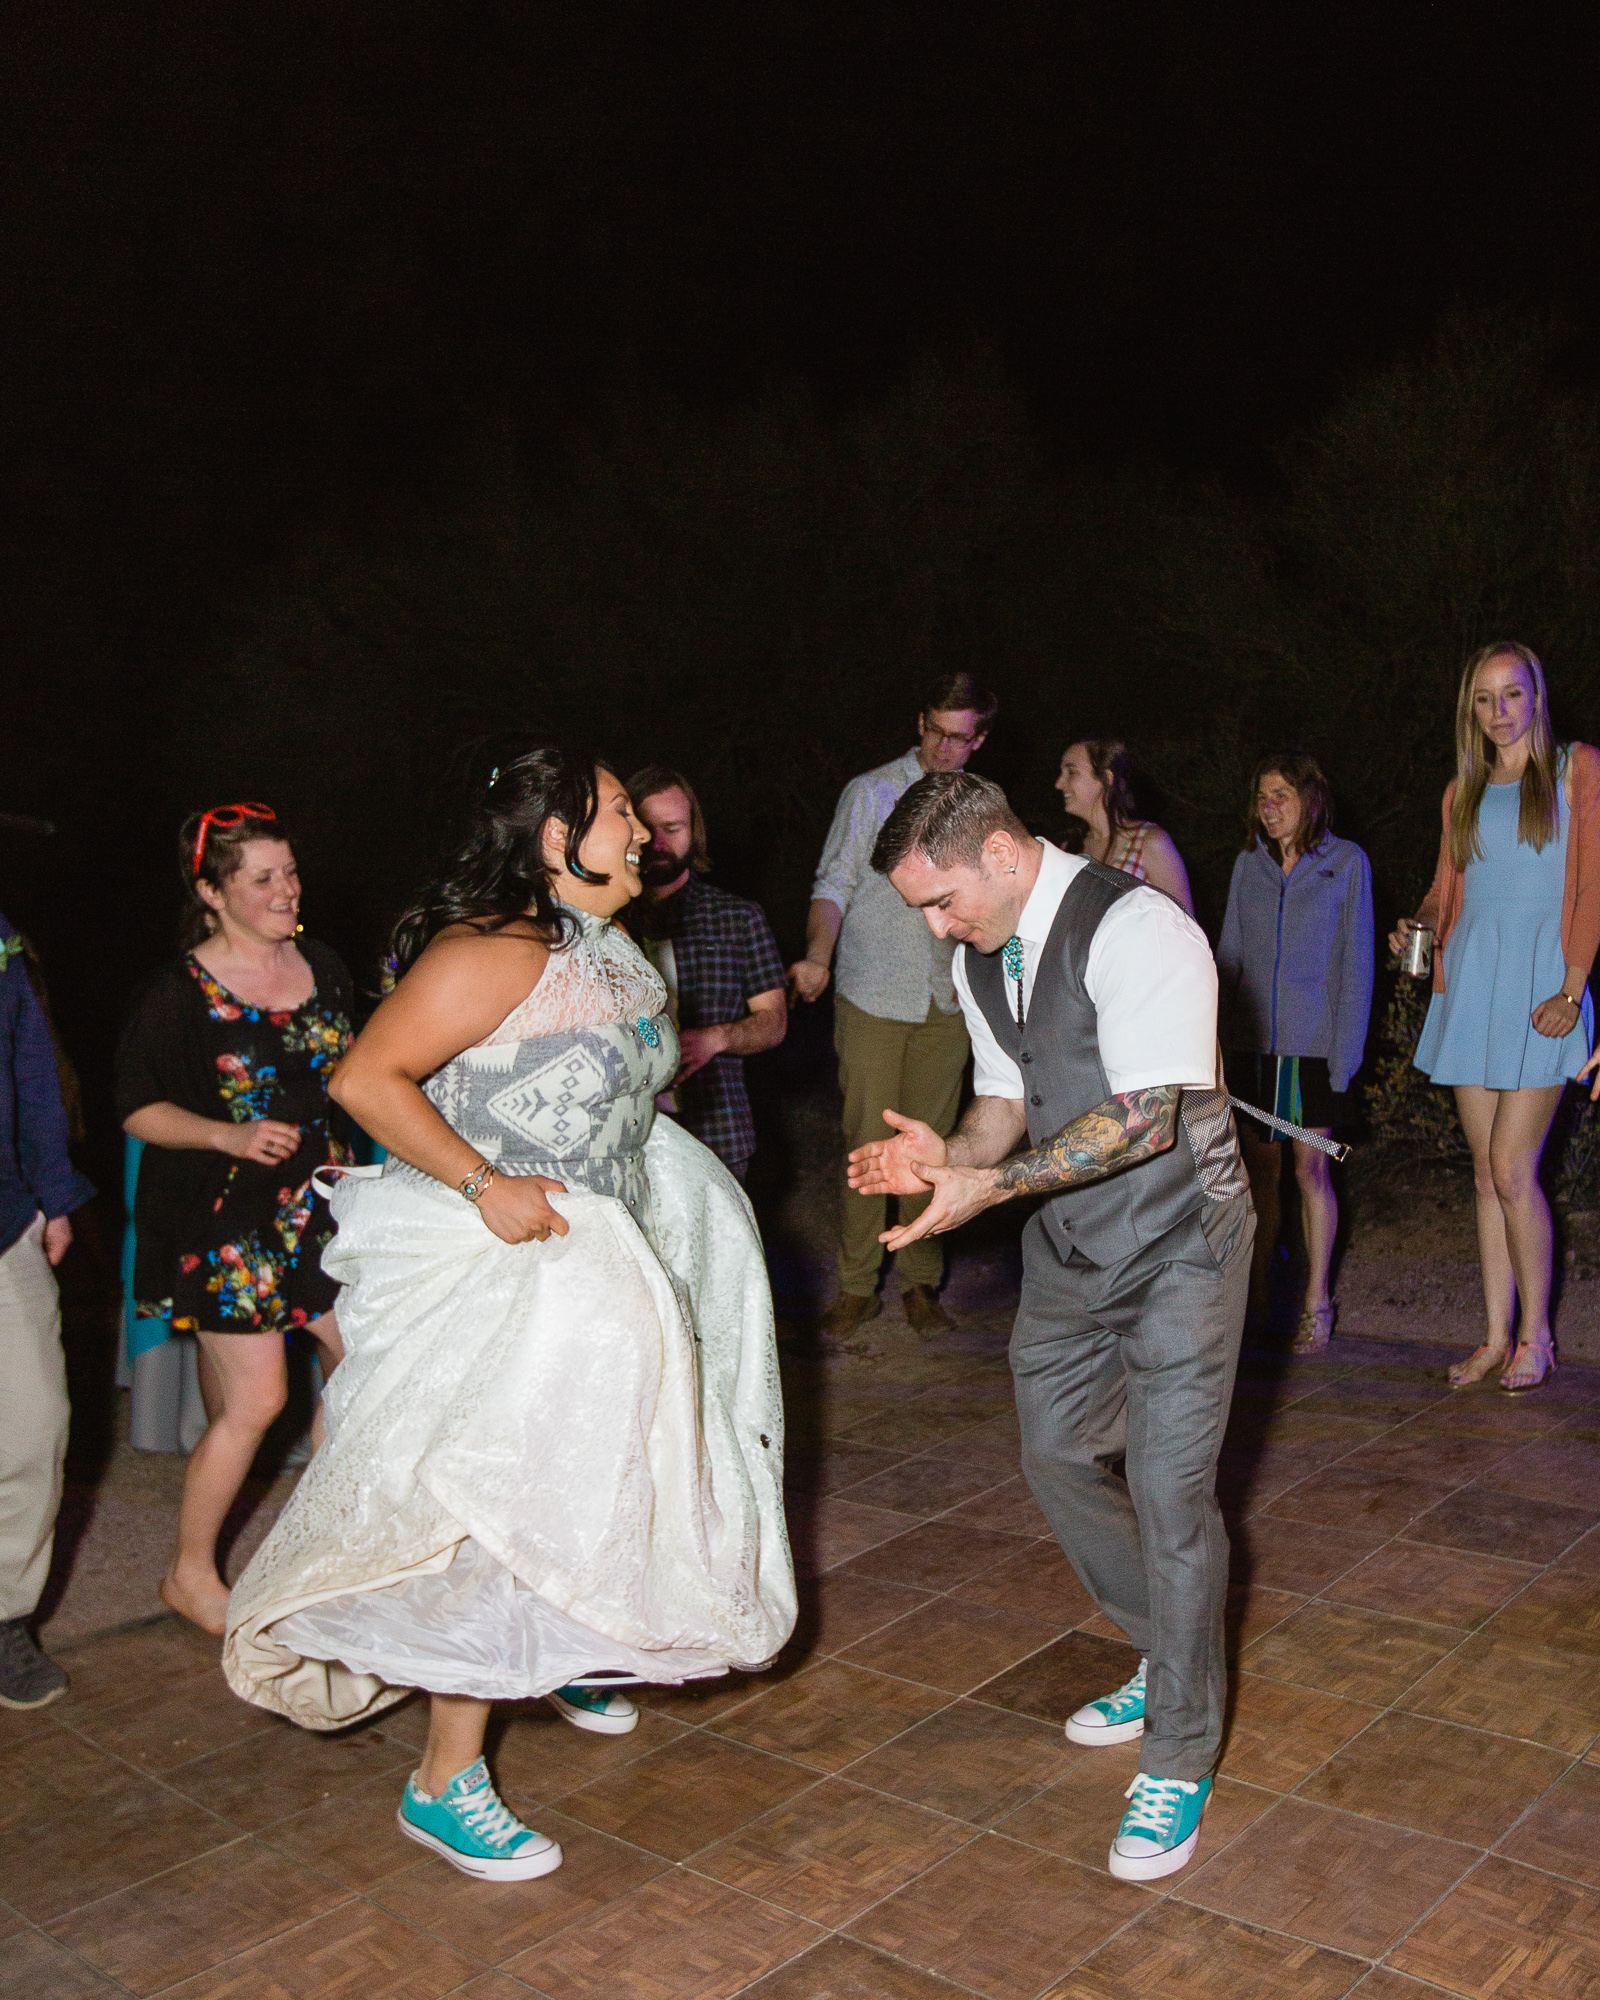 Bride and groom dancing with guests to an Irish song at their wedding reception by Arizona wedding photographer PMA Photography.